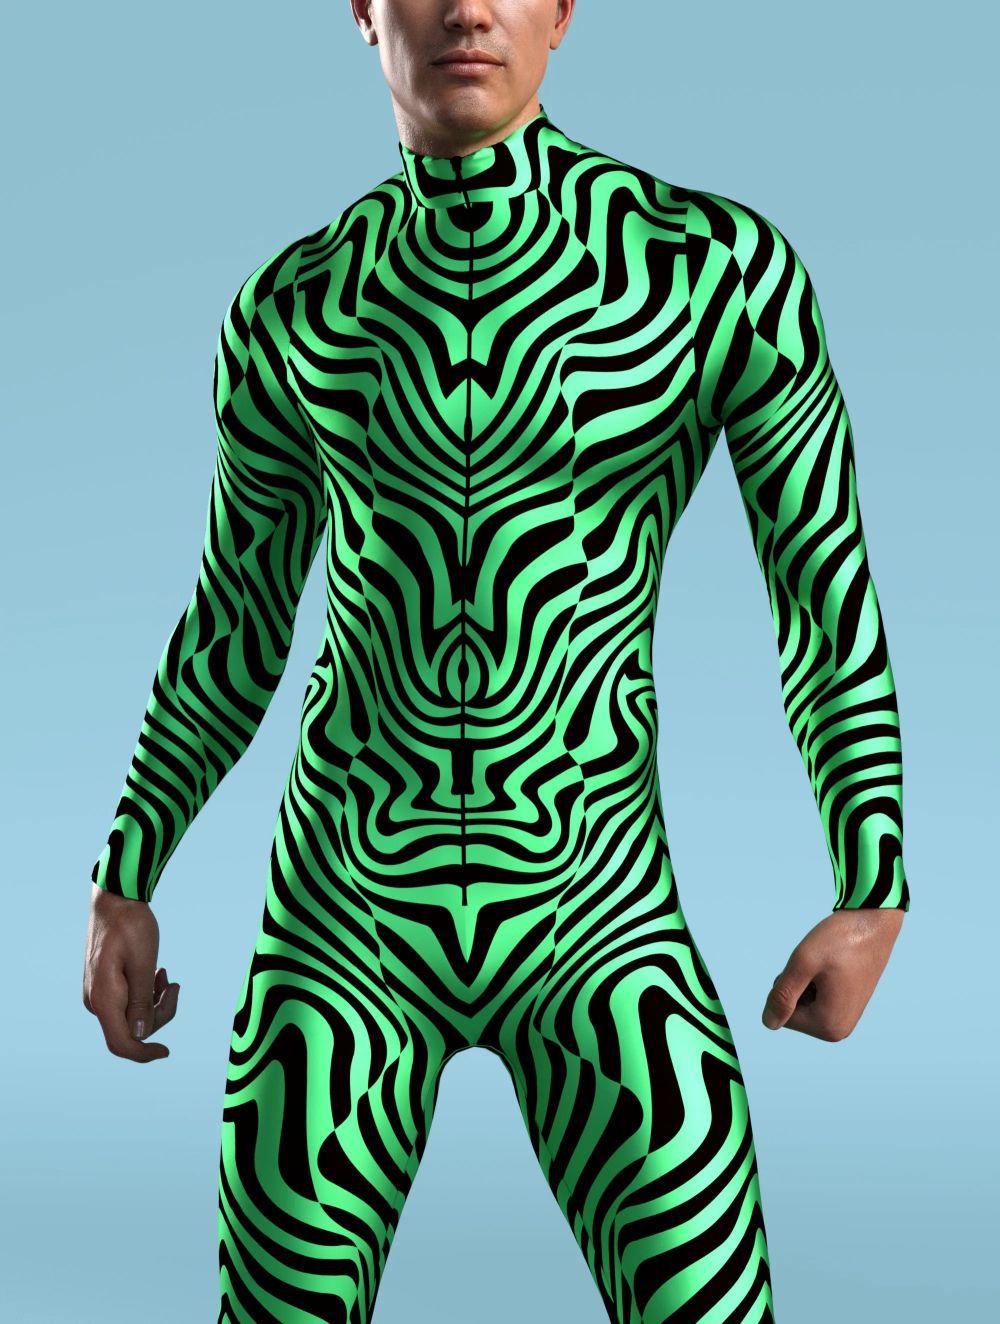 A person wearing a Maramalive™ 3D Digital Printed Cosplay One-piece Costume with a green and black abstract, wavy stripe pattern, reminiscent of European and American style, stands against a plain blue background. The chemical fiber blend of the costume adds to its sleek appearance.